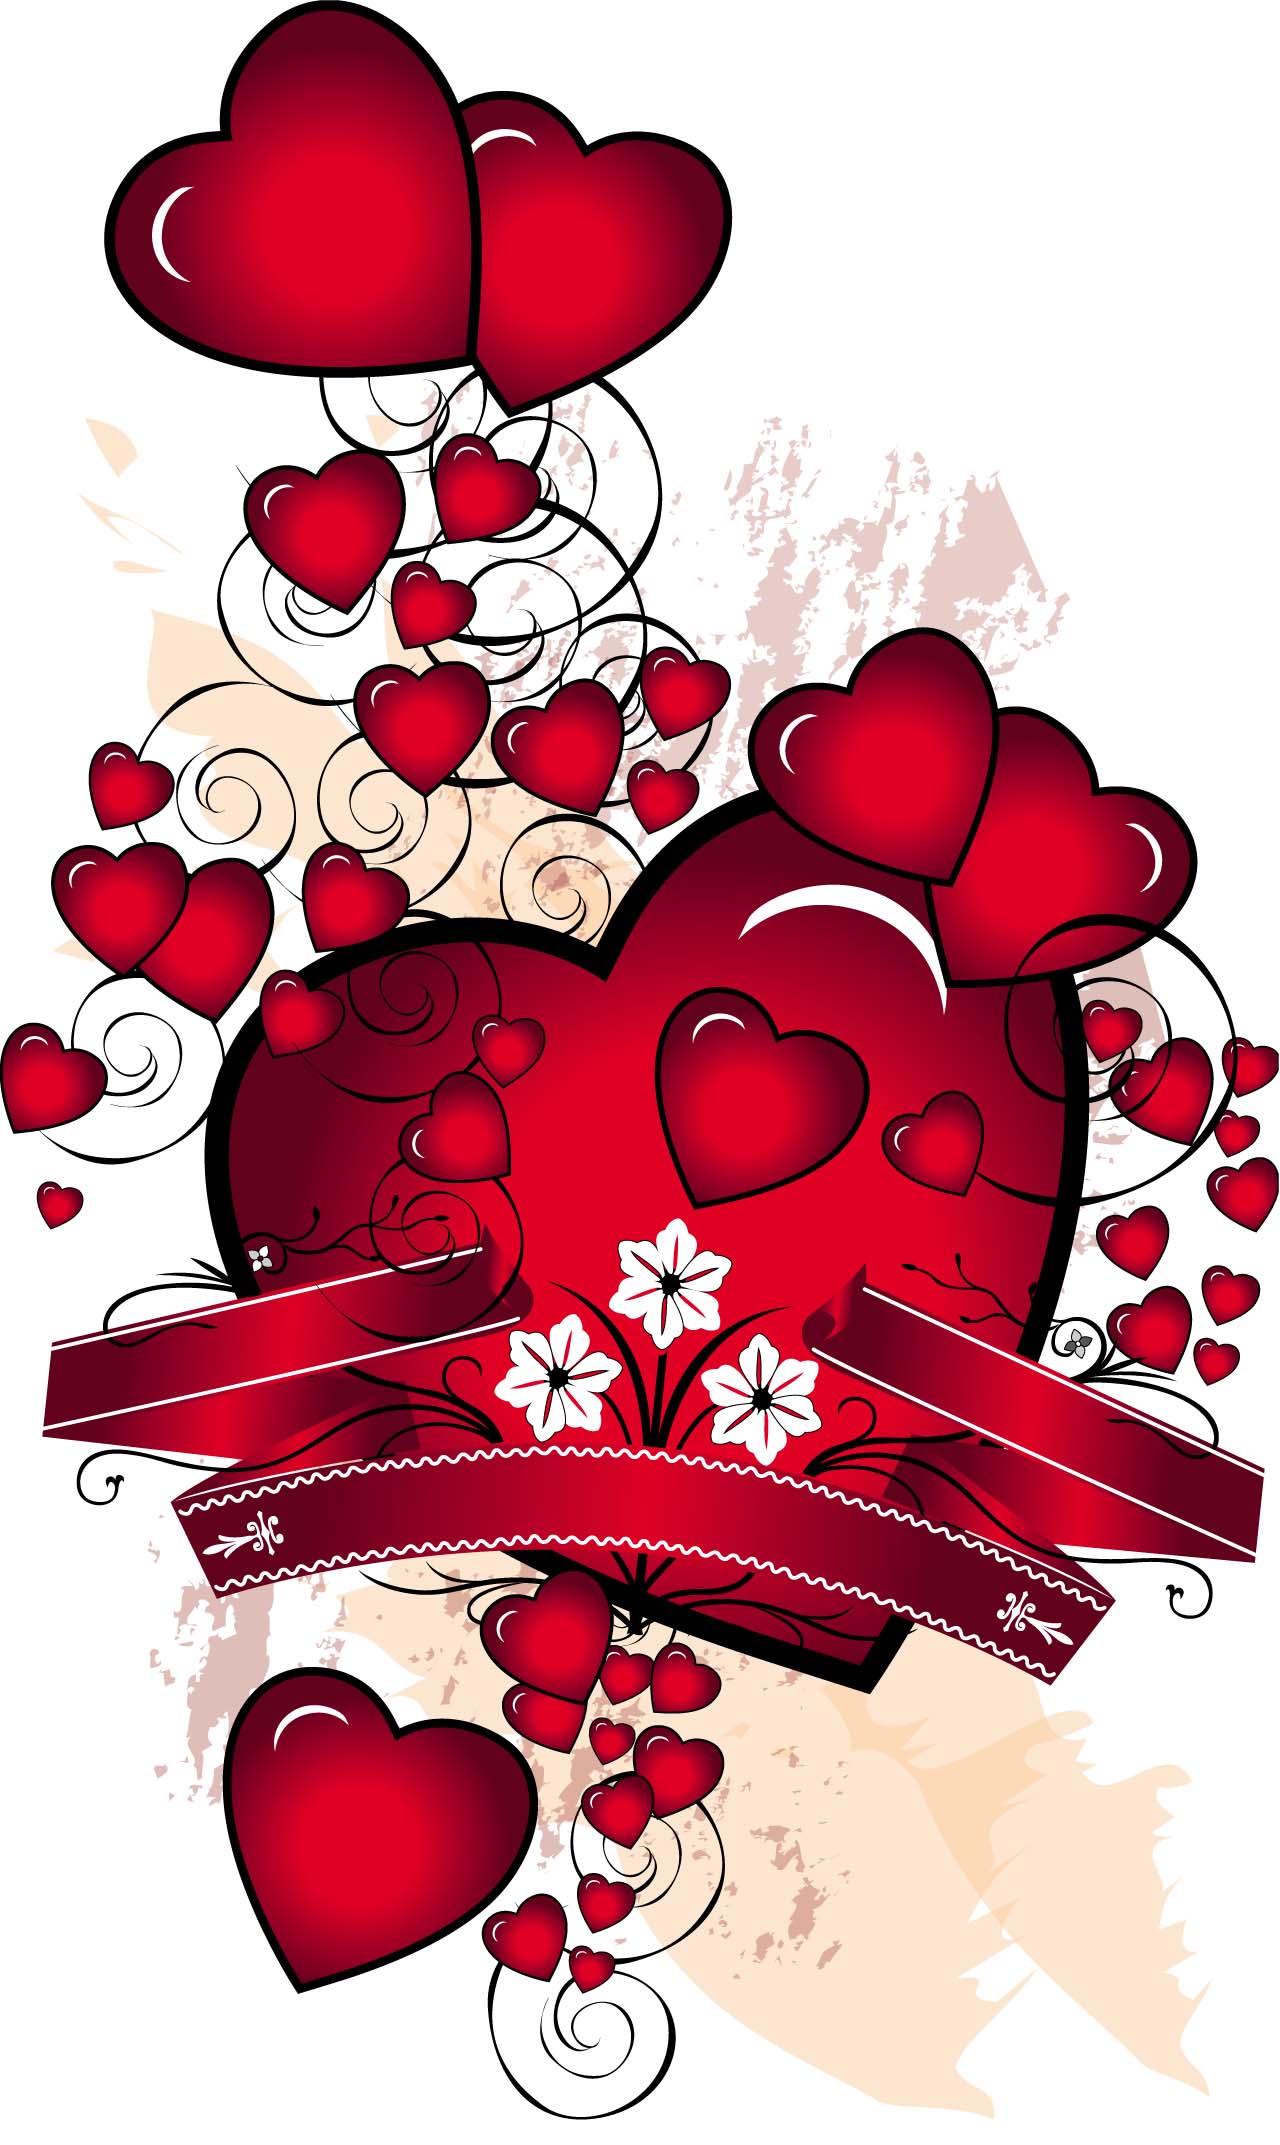 Red Hearts And Ribbons Vector Card Free Download